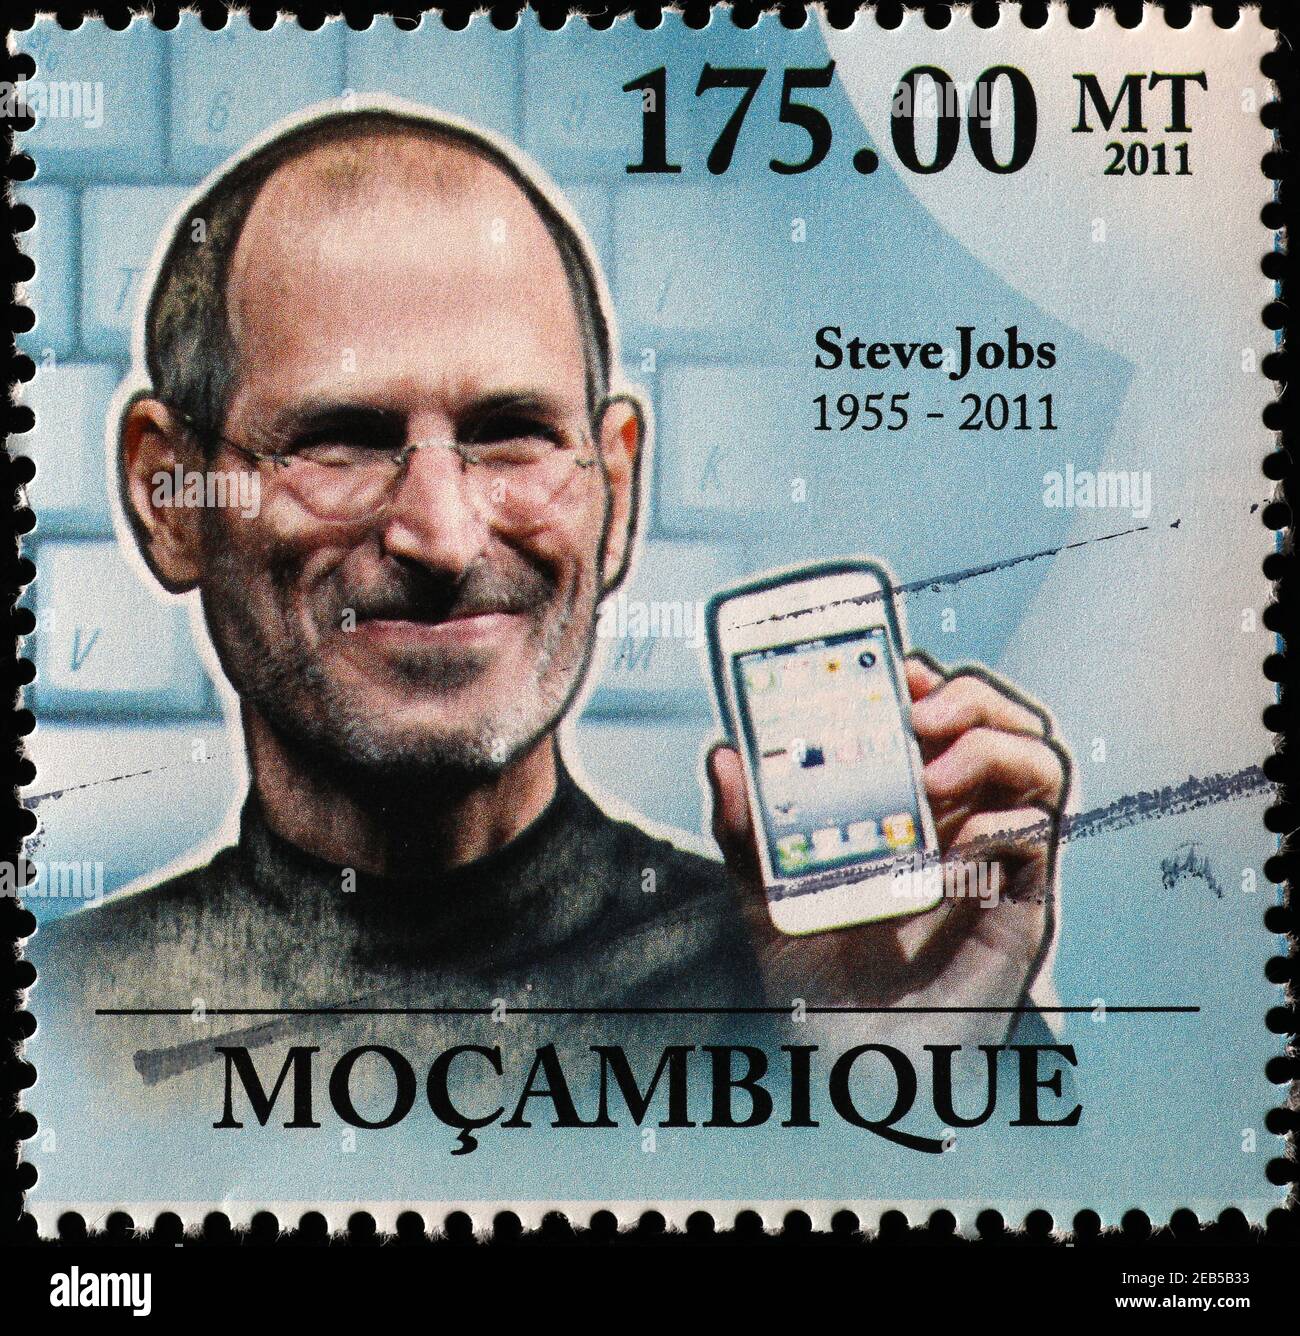 Steve Jobs showing an I-Phone on postage stamp Stock Photo